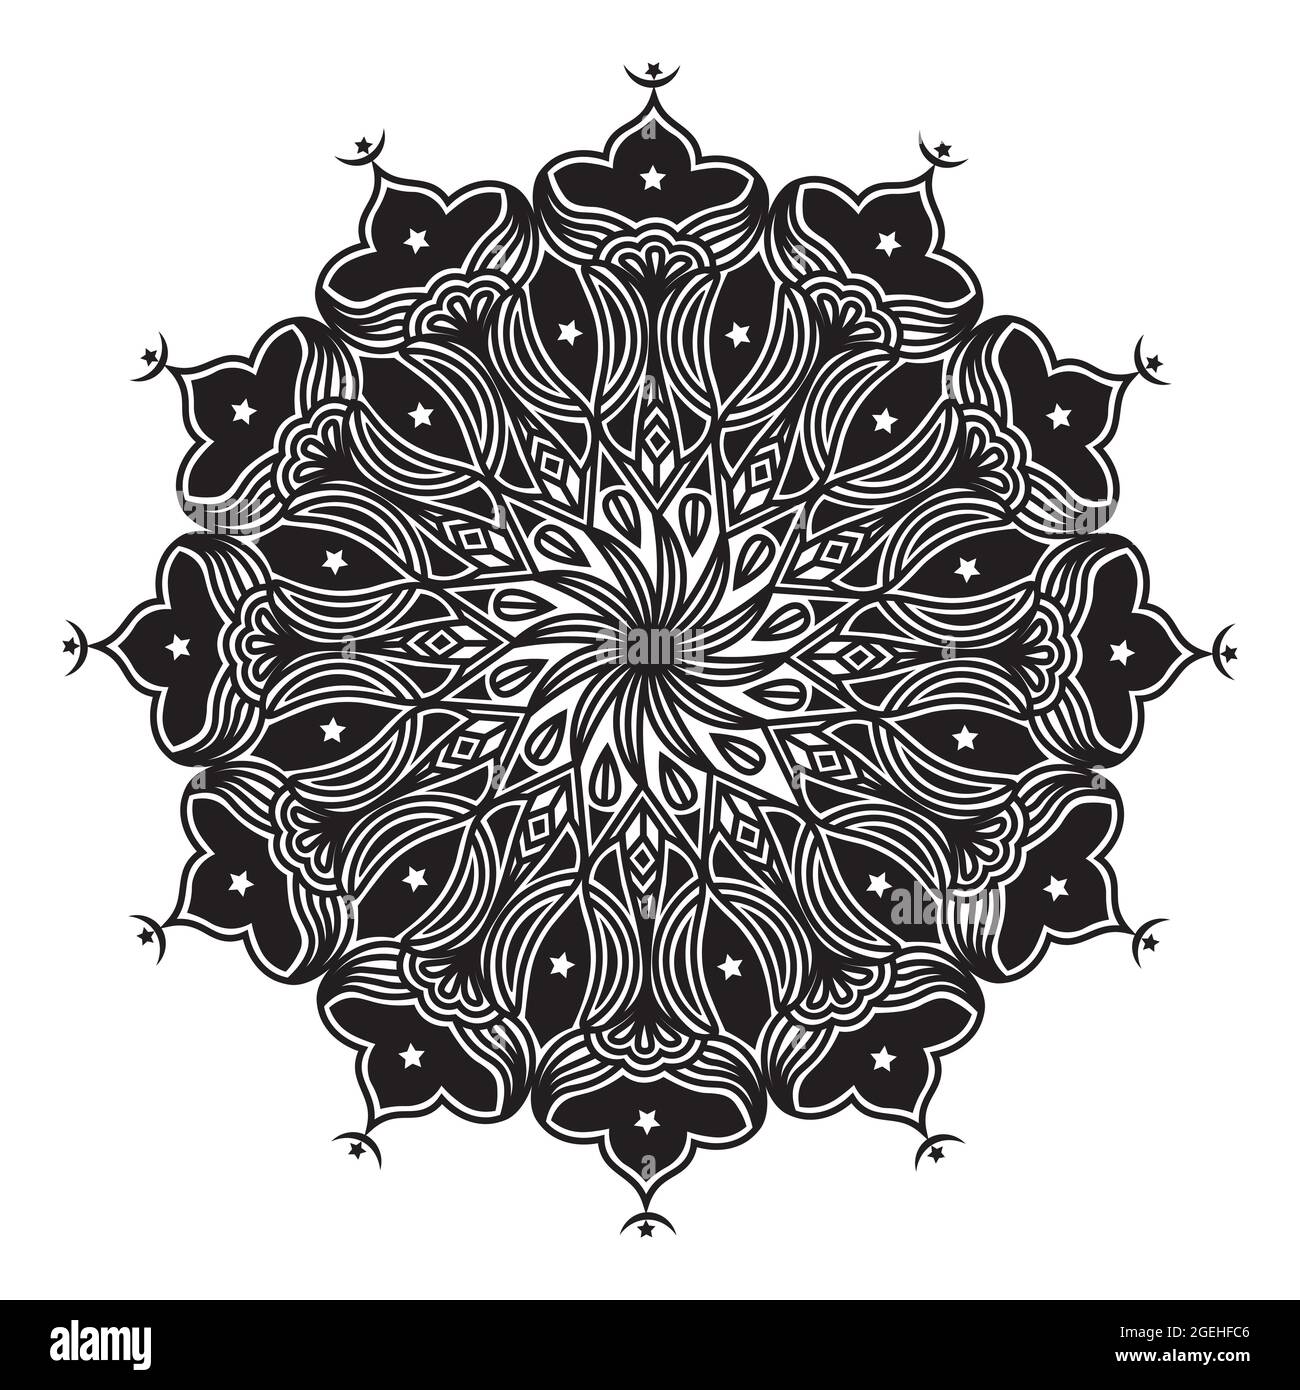 mandala relaxing adult creative mystical decorative floral meditation design of graphic element background Stock Vector